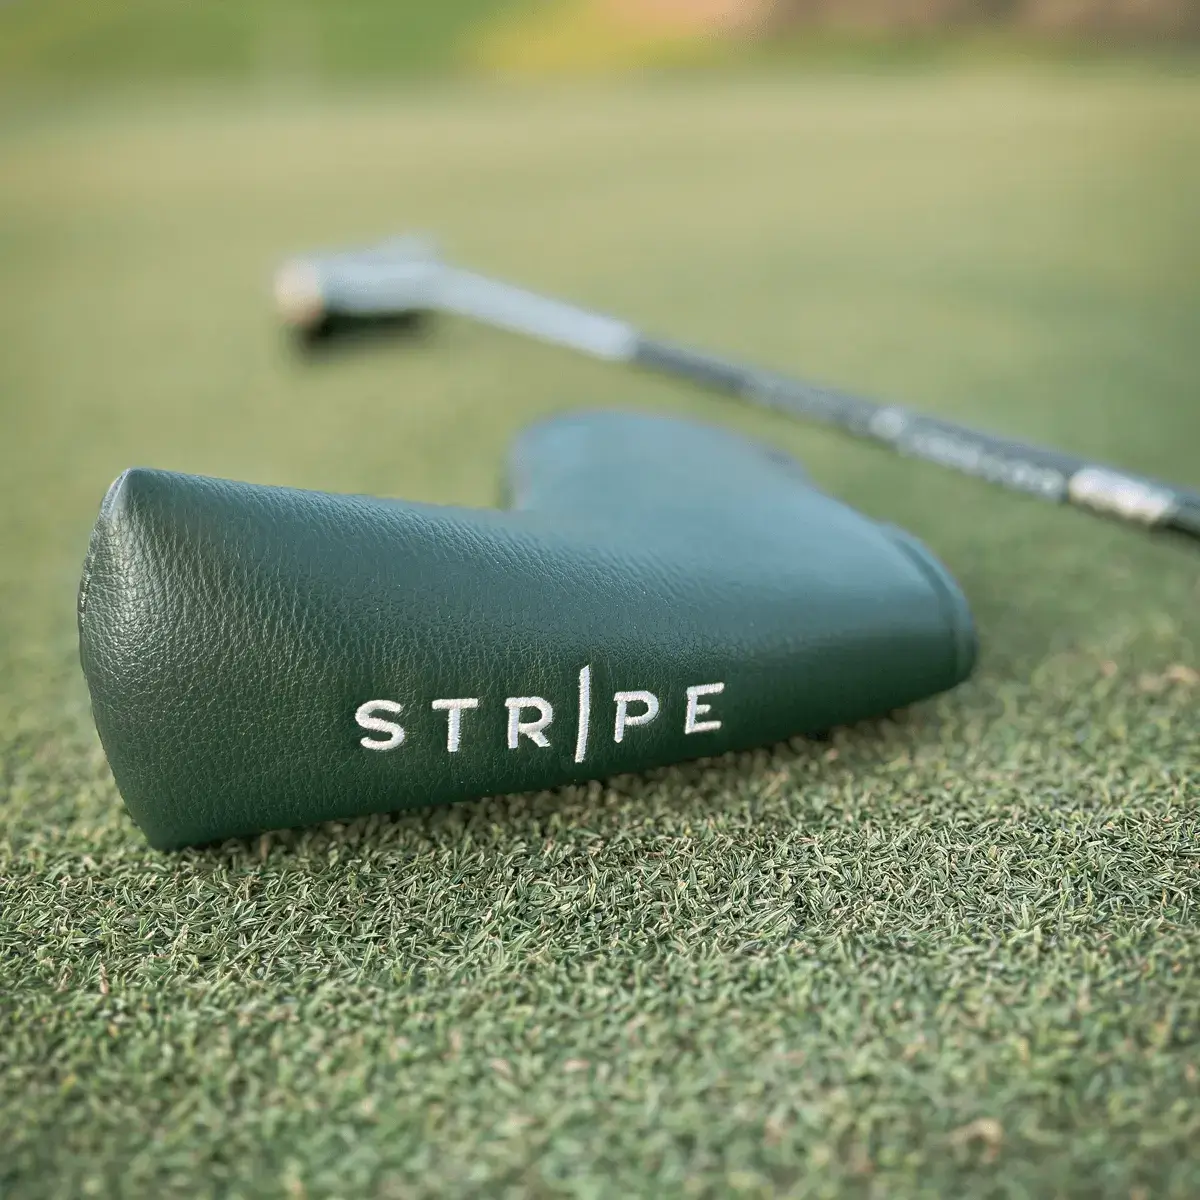 A green leather headcover on the putting green with a golf club, featuring the Stripe Golf logo in white embroidery.